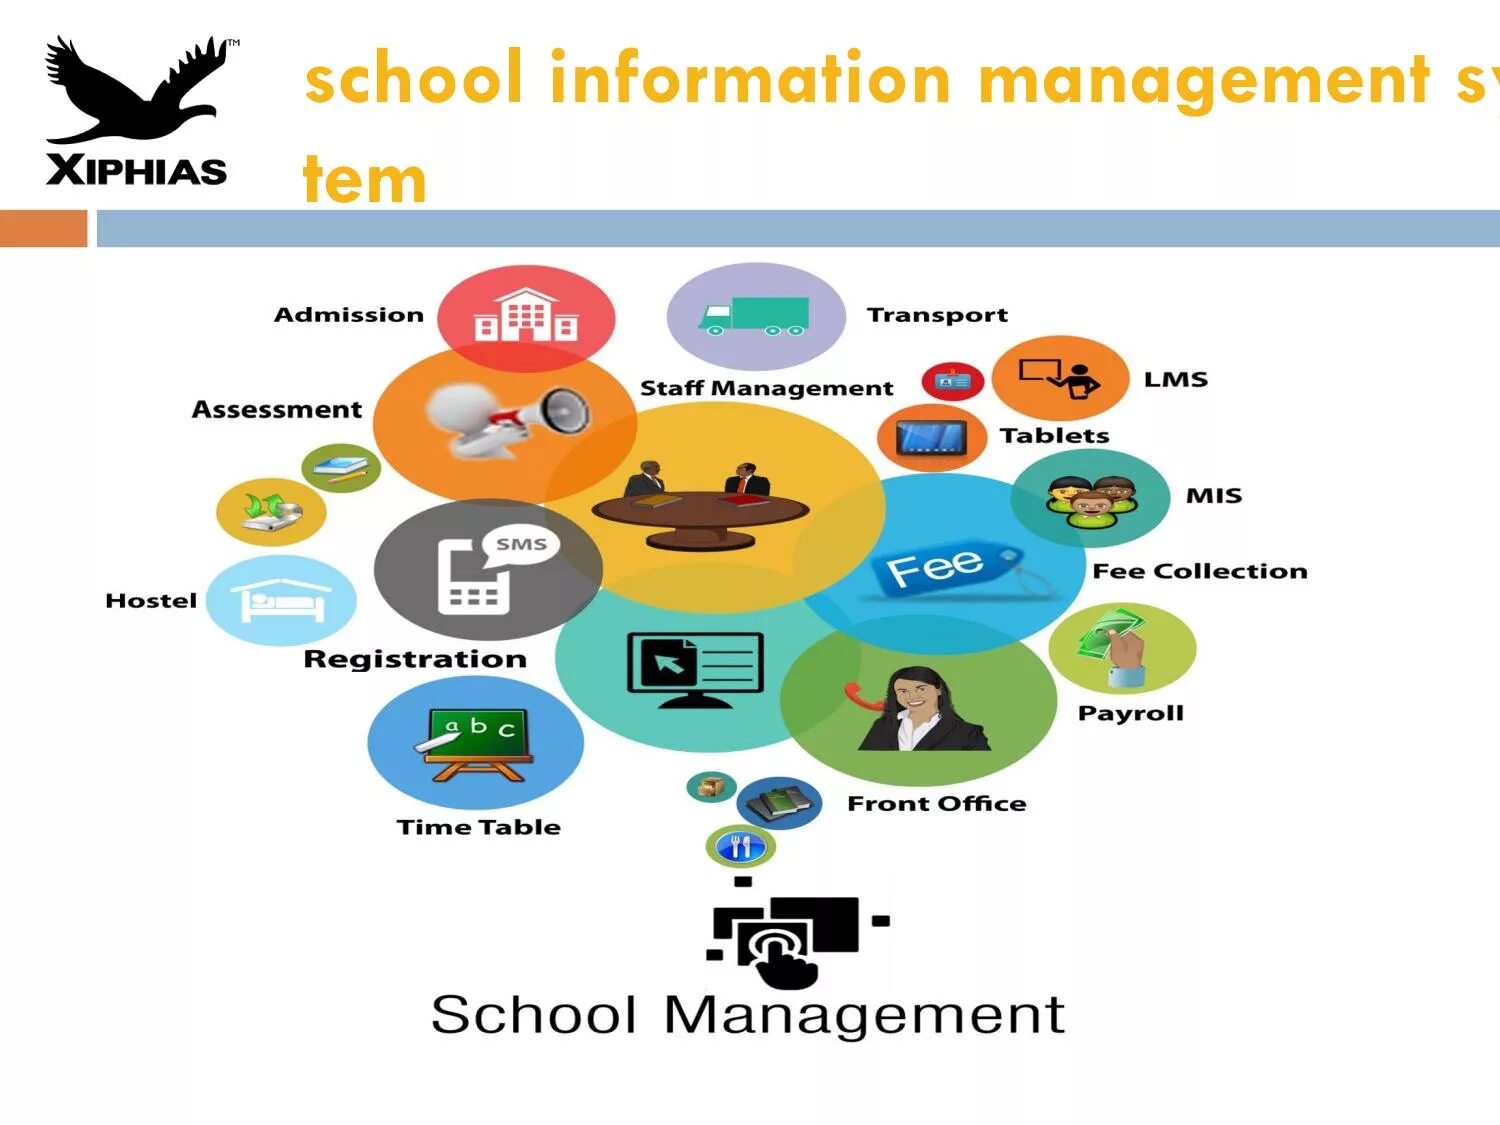 Management information Systems. LMS Learning Management System. School Management System. School information Management System. Management information system